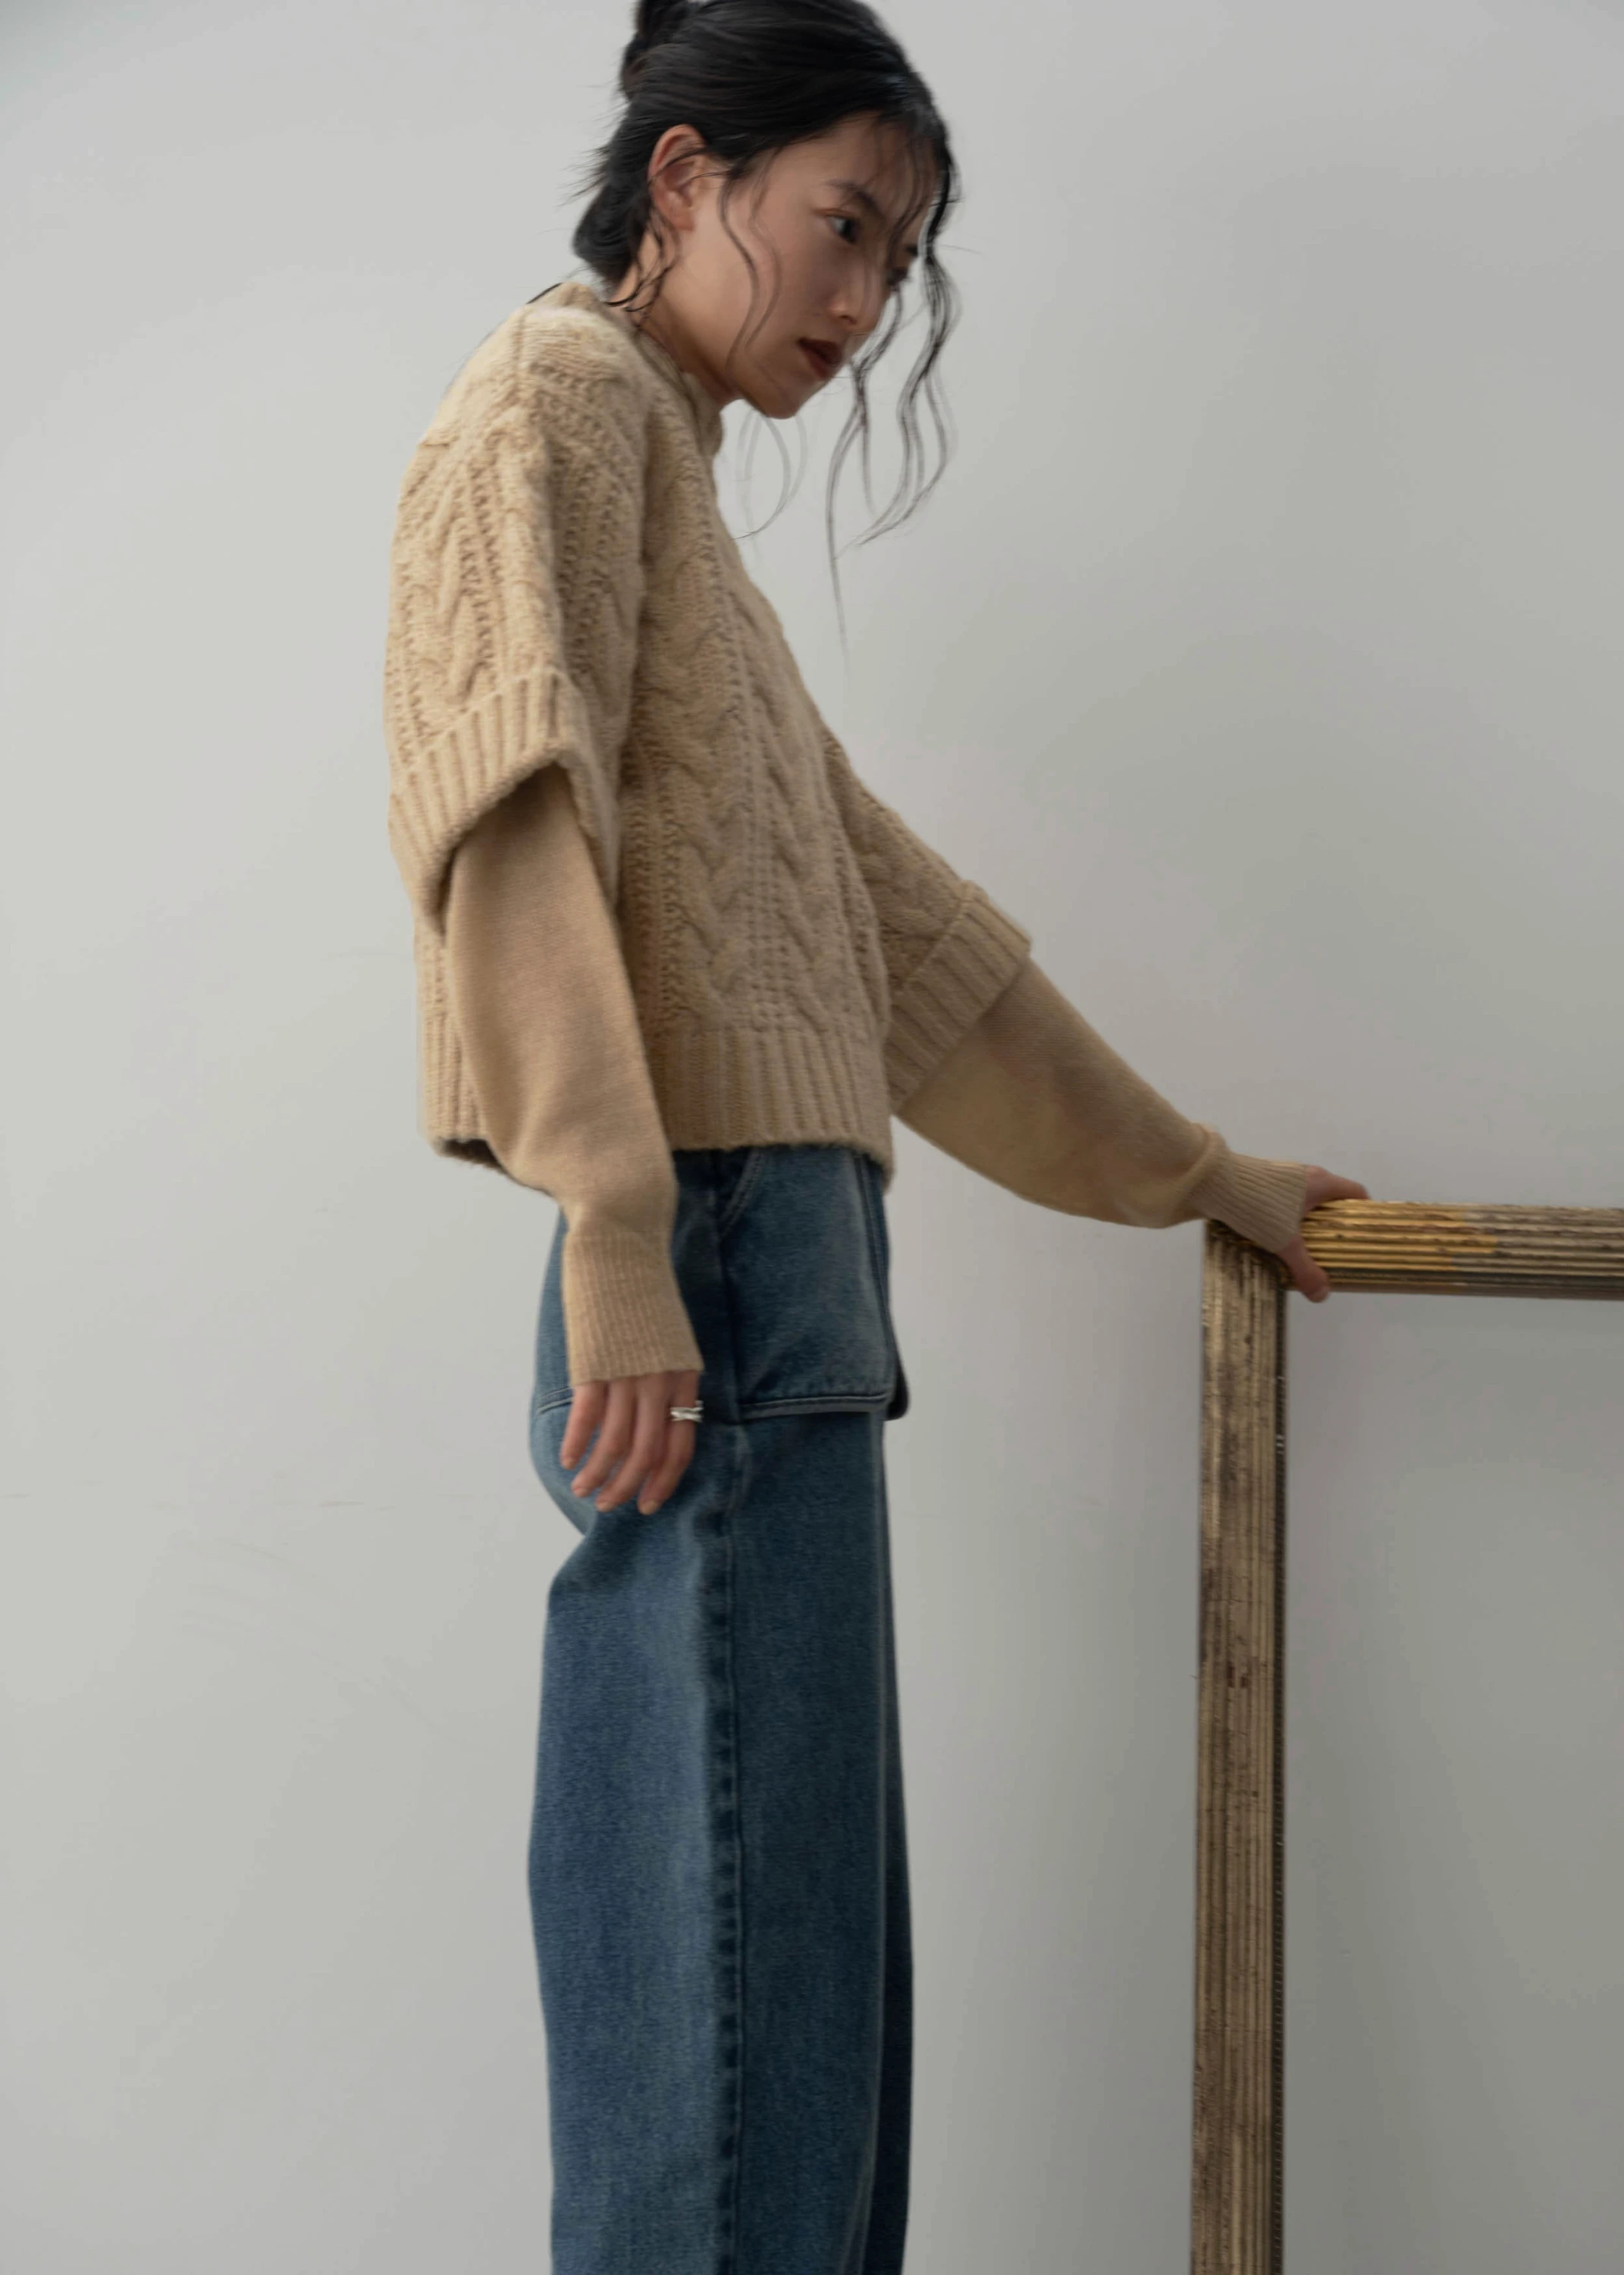 layered cable mock neck knit / willfully（ウィルフリー）のknit通販 